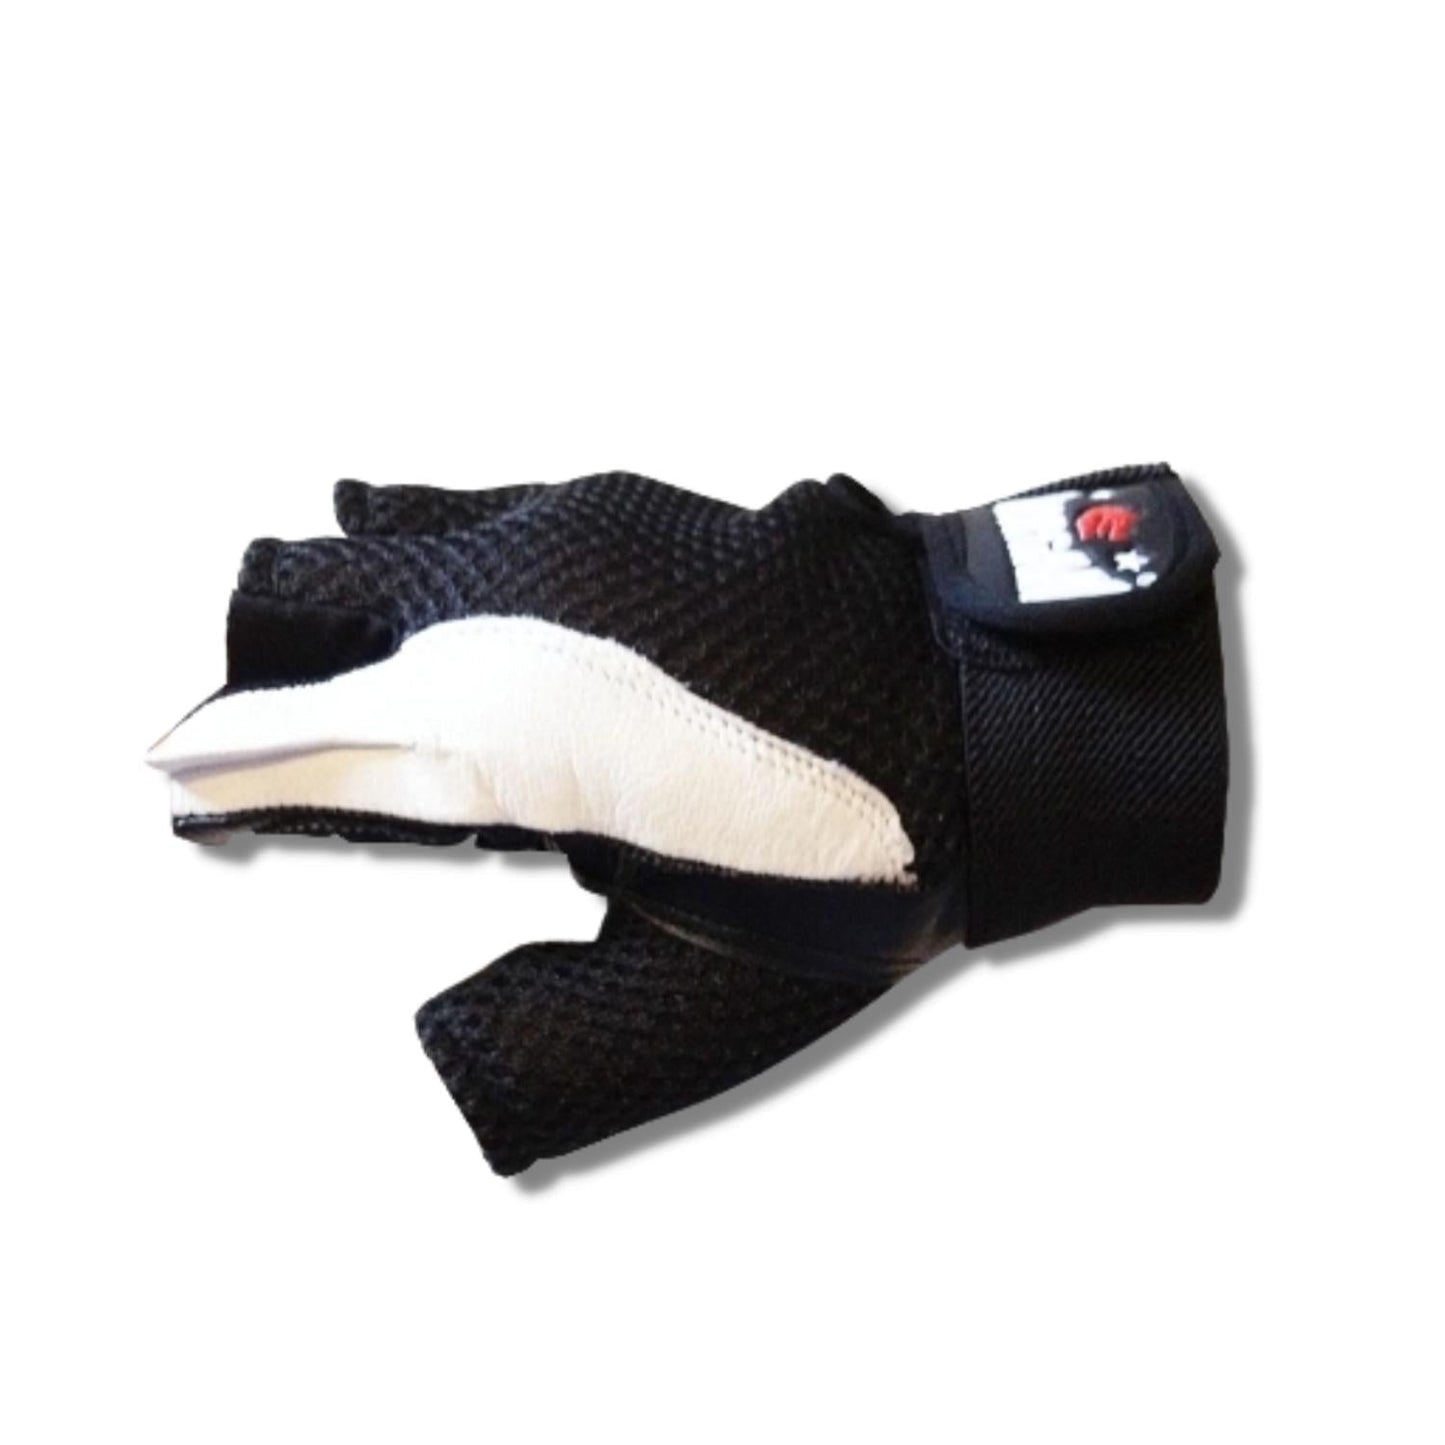 -Weight Lifting Gloves-Gym Direct